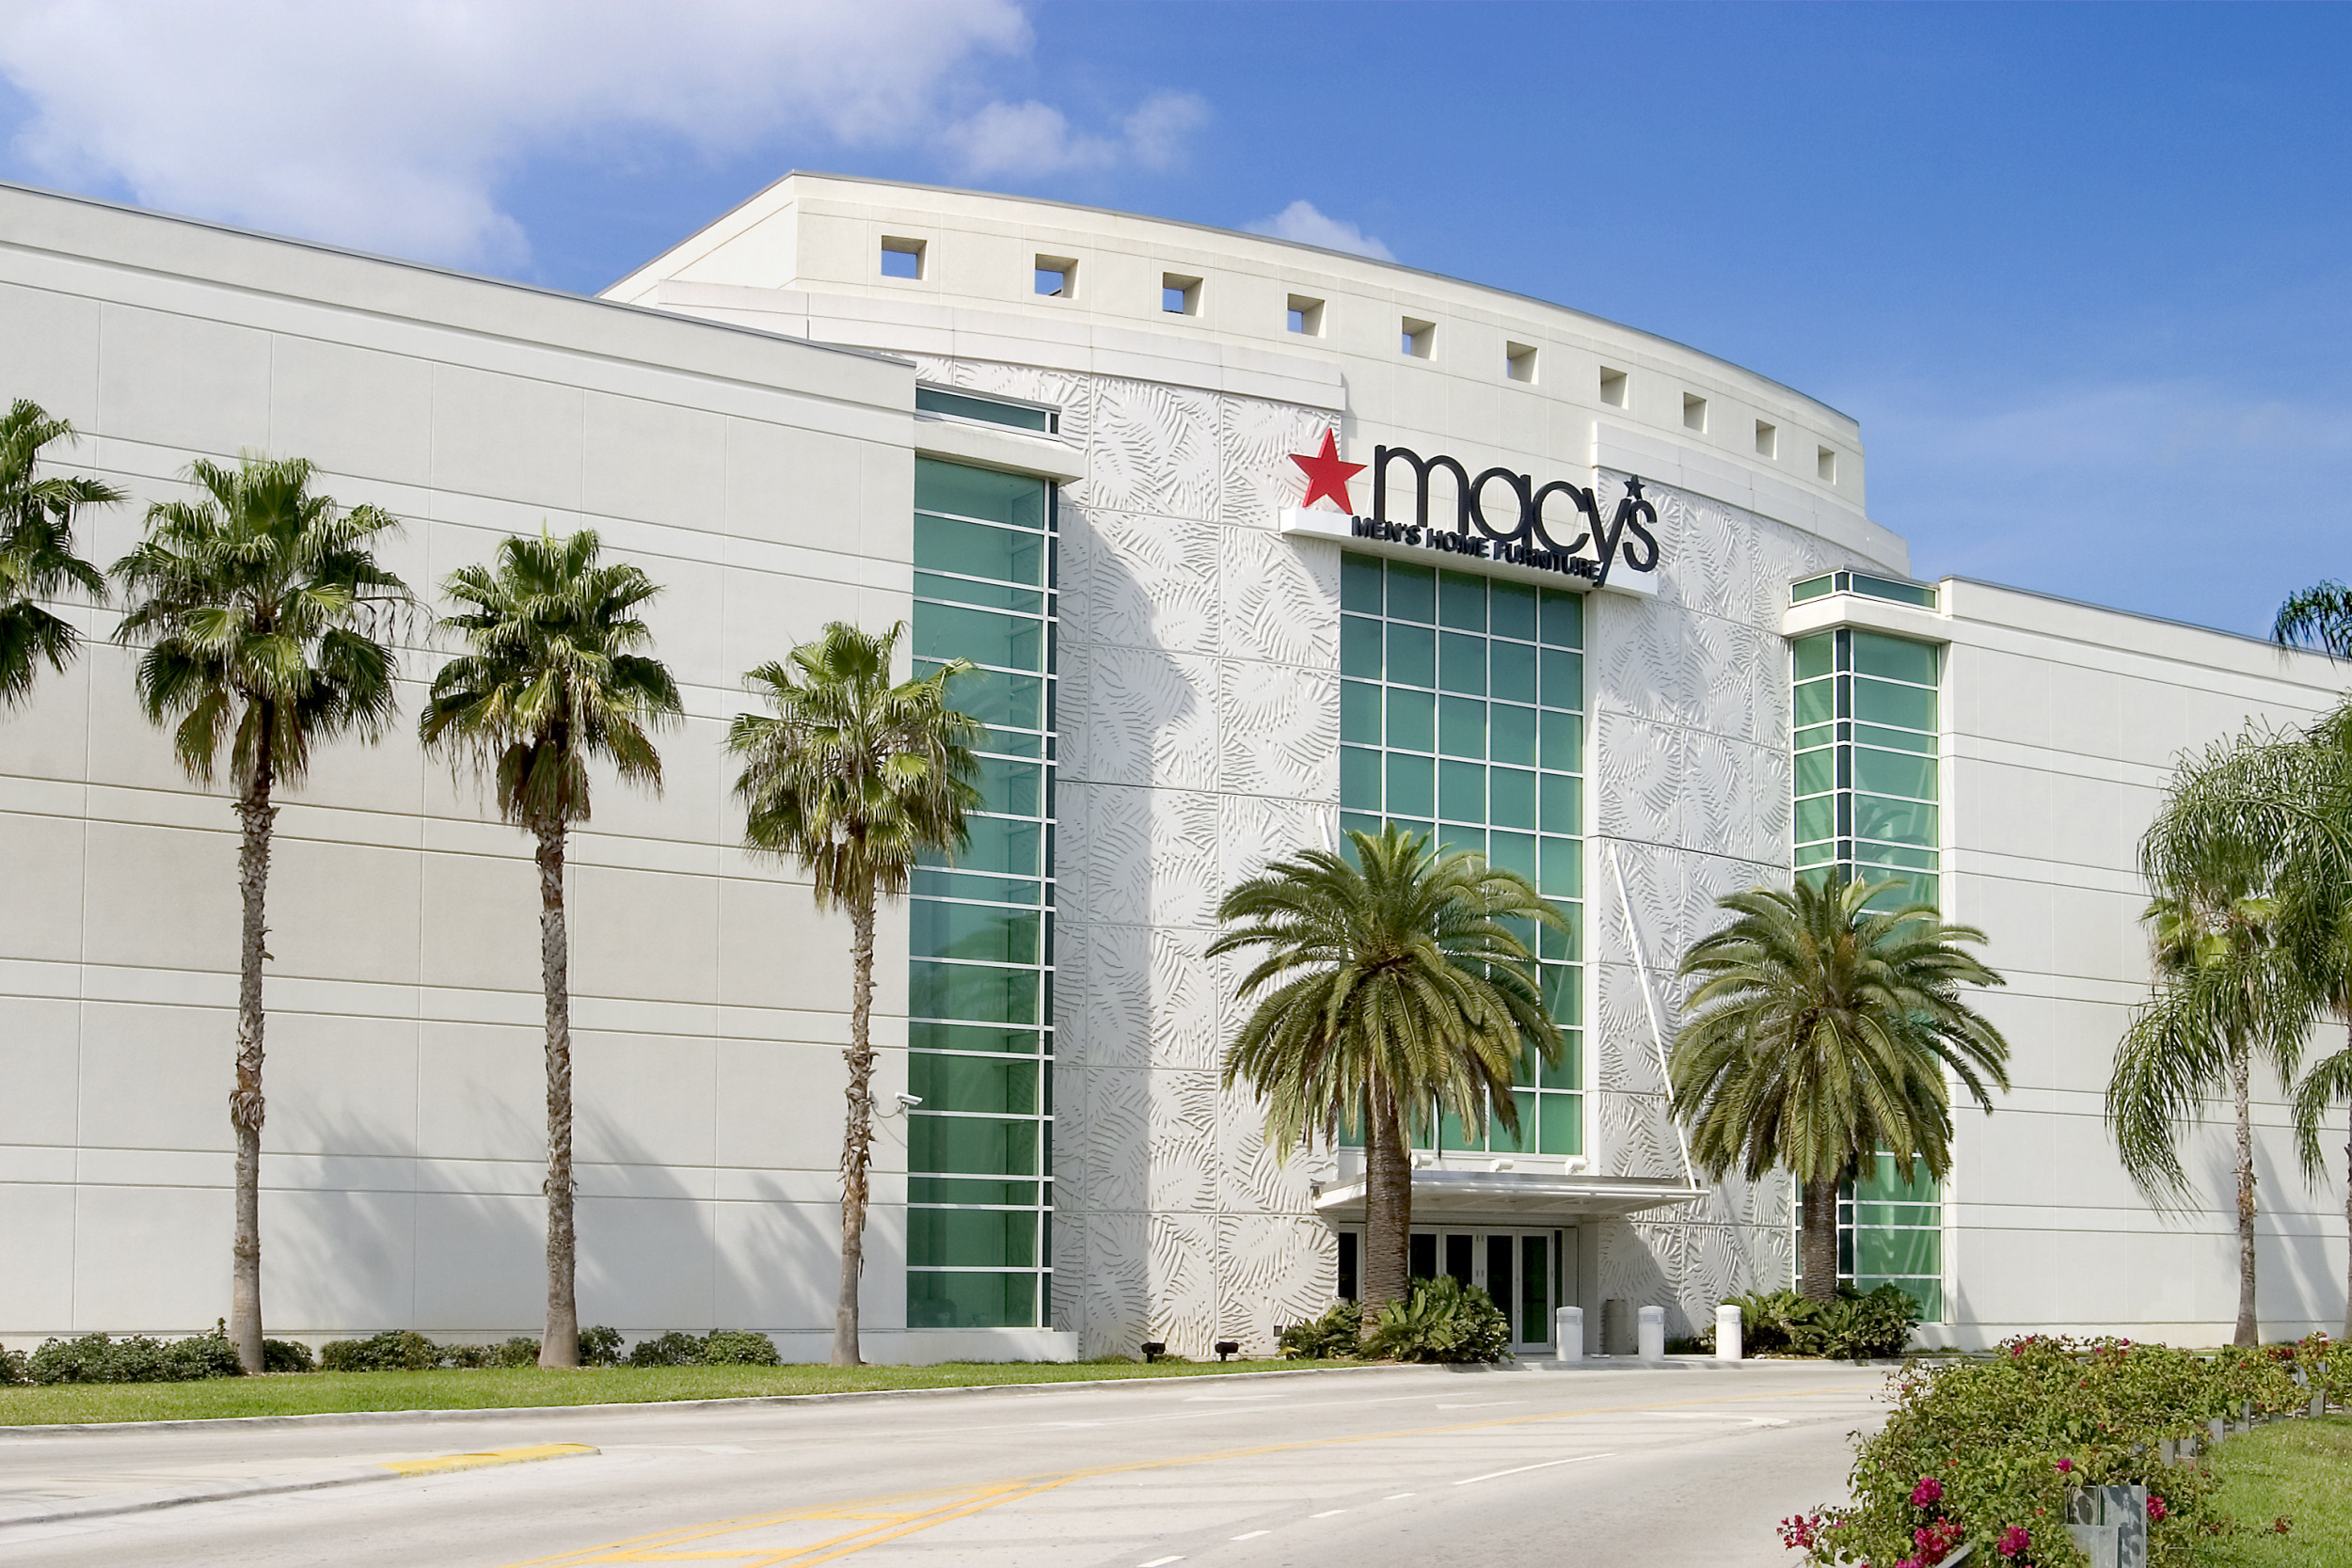 Macy's Data Breach 2019 How to Check If You Have Been Affected